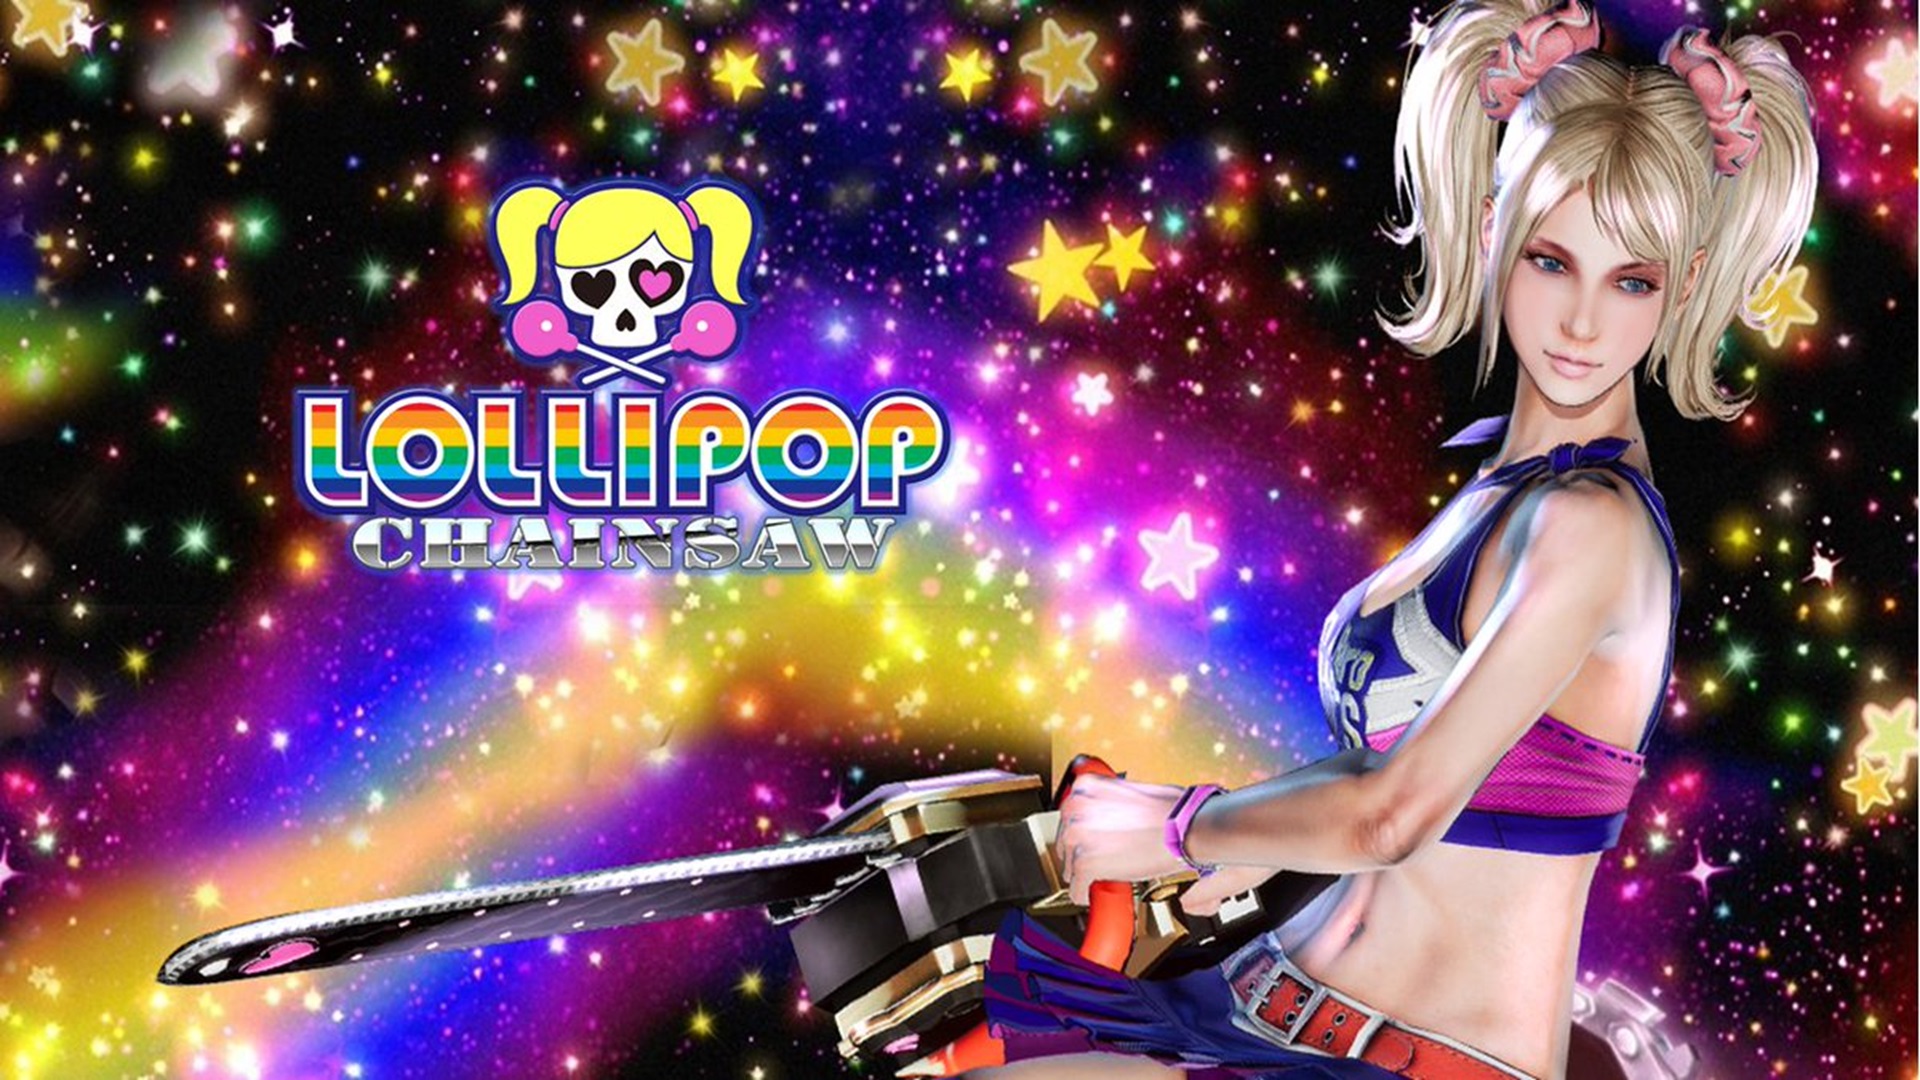 Biohazard URimate aug [NEWS]: The Lollipop Chainsaw Remake is now  officially known as the Lollipops Chainsaw Repop! The remake will be  available next summer. Rate this translation SS - iFunny